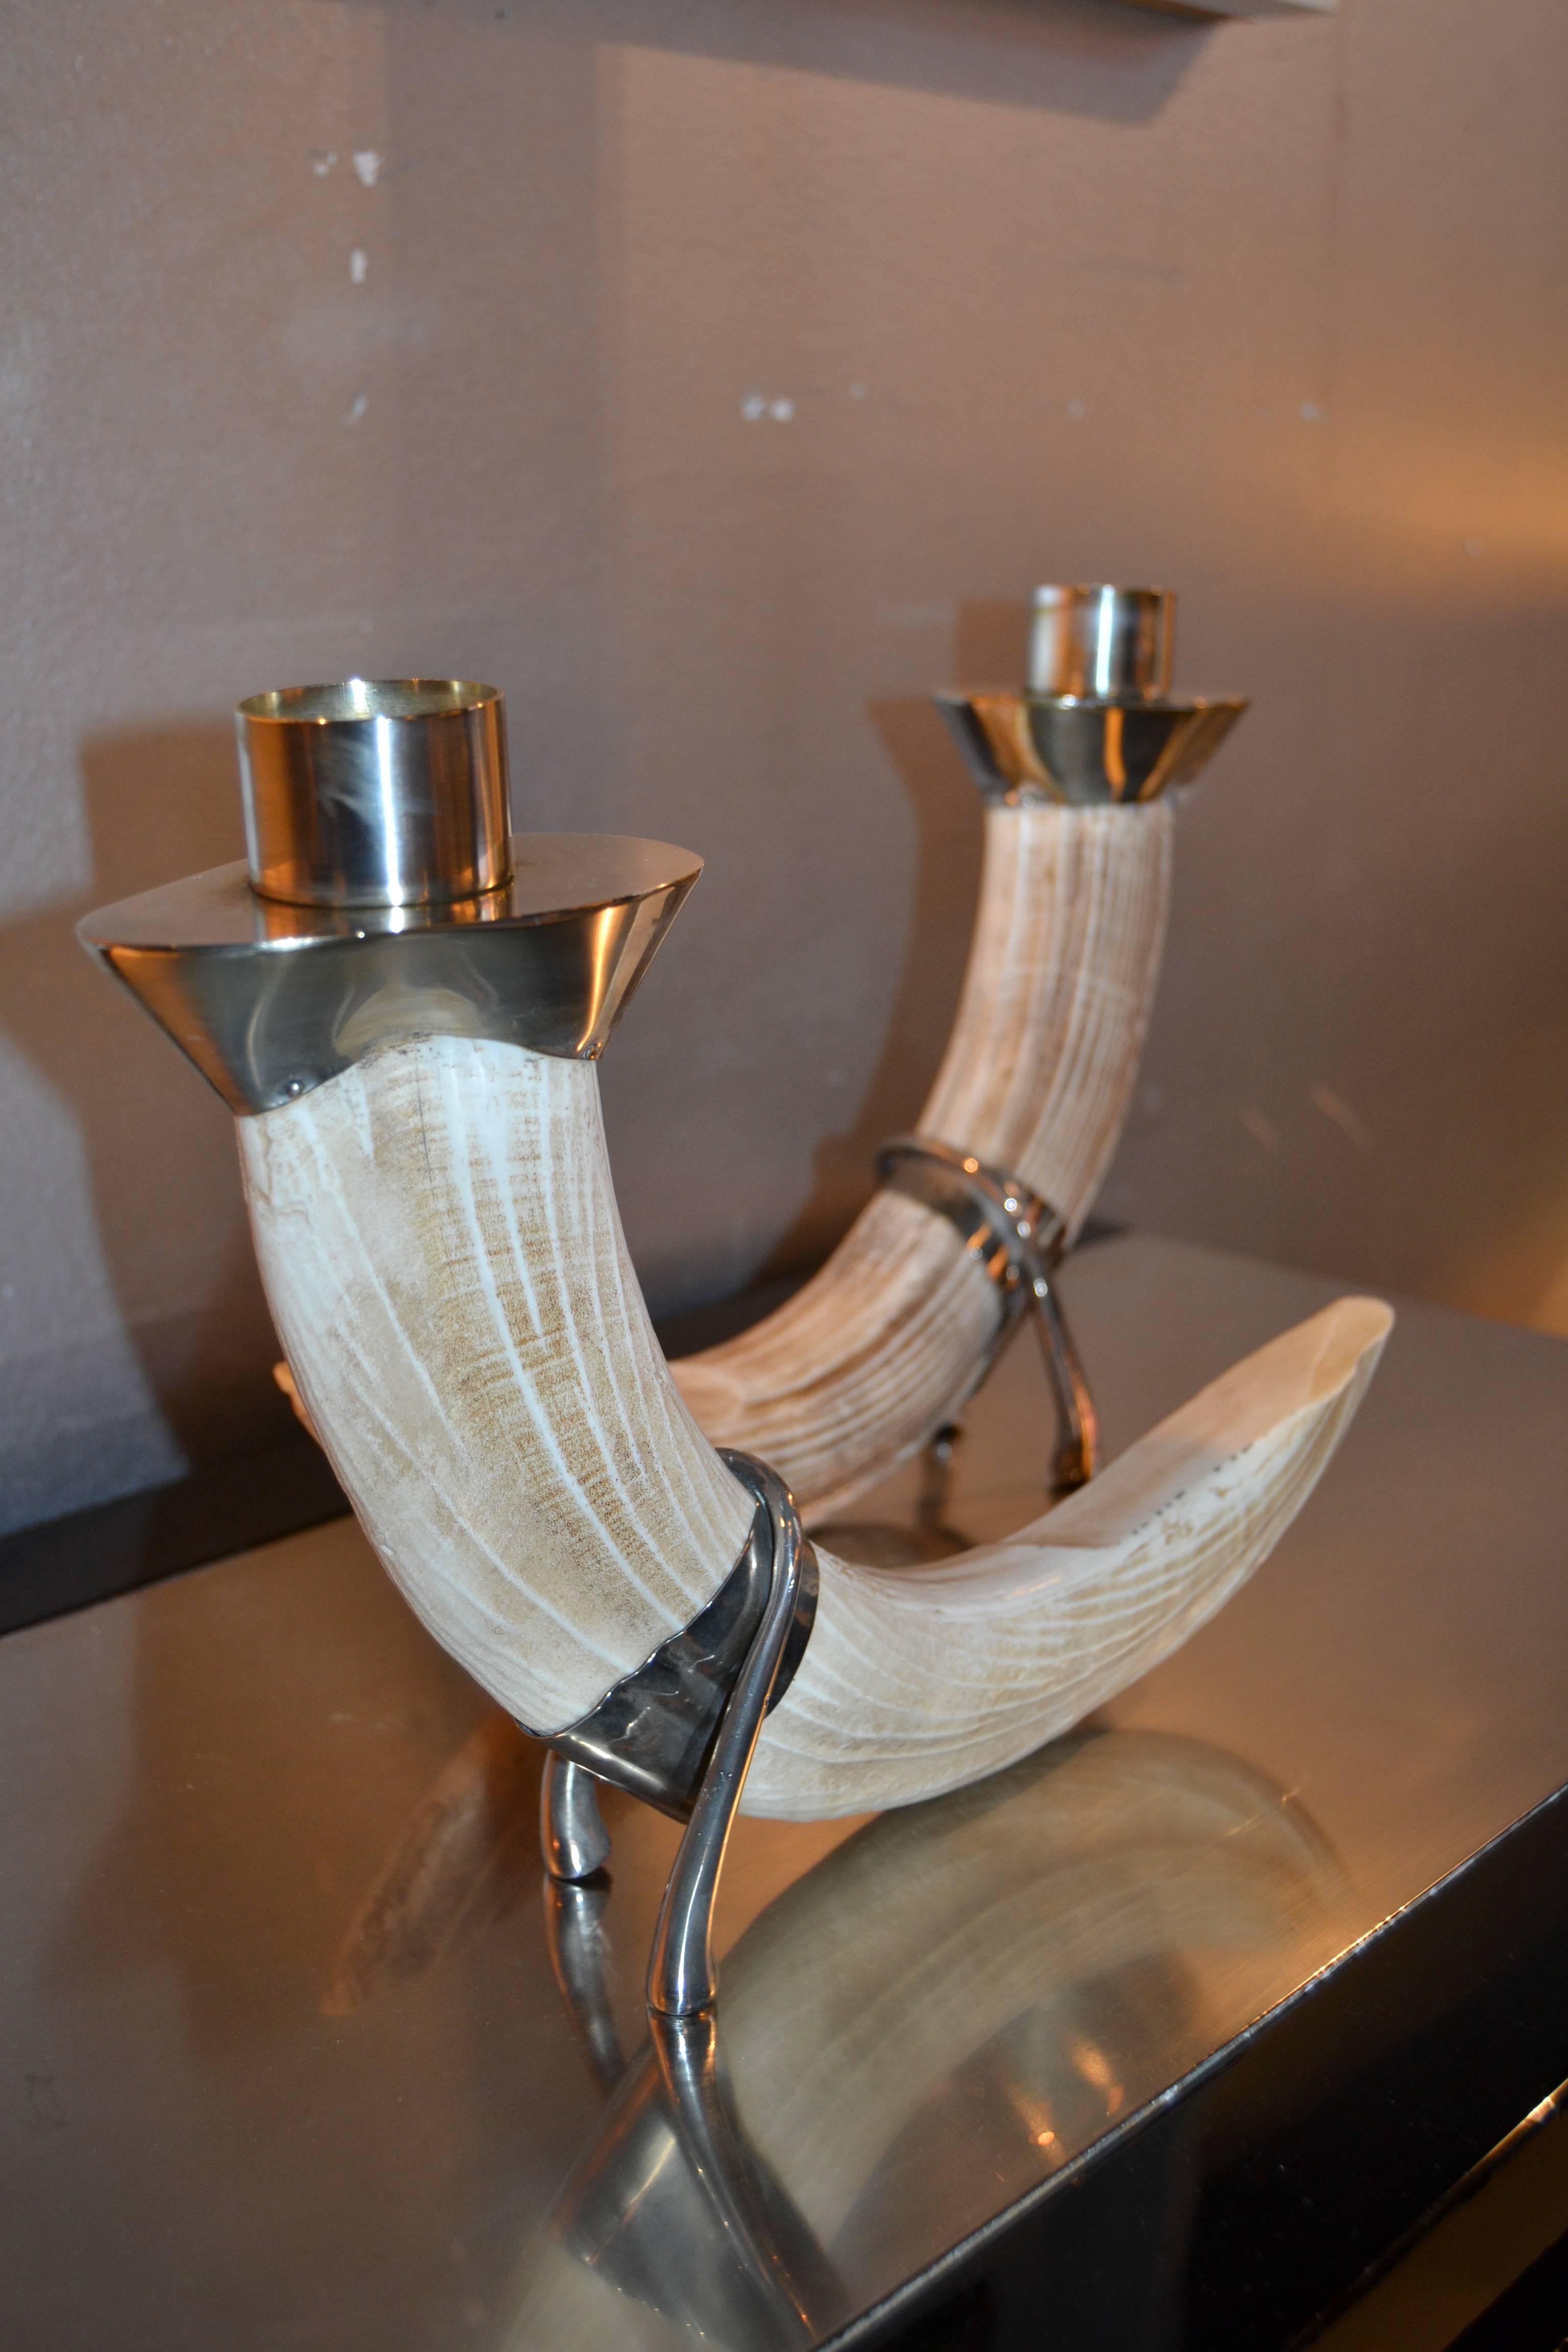 1970s Christian Dior faux resin tusk and silver plated candlesticks.
Signed Christian Dior.
Great vintage condition.